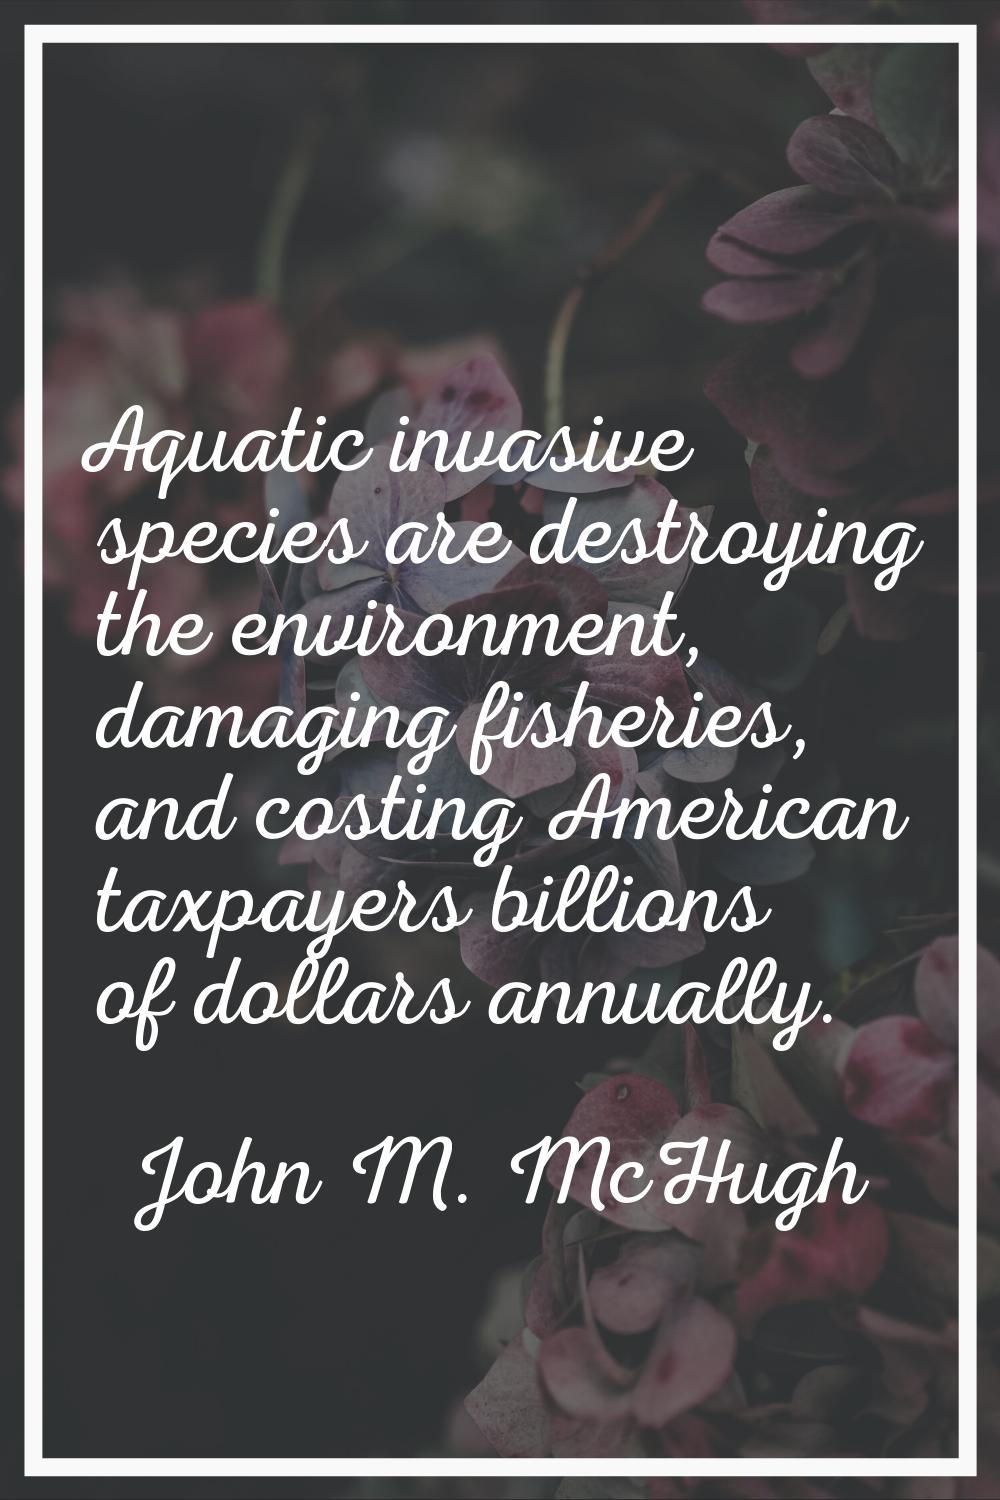 Aquatic invasive species are destroying the environment, damaging fisheries, and costing American t